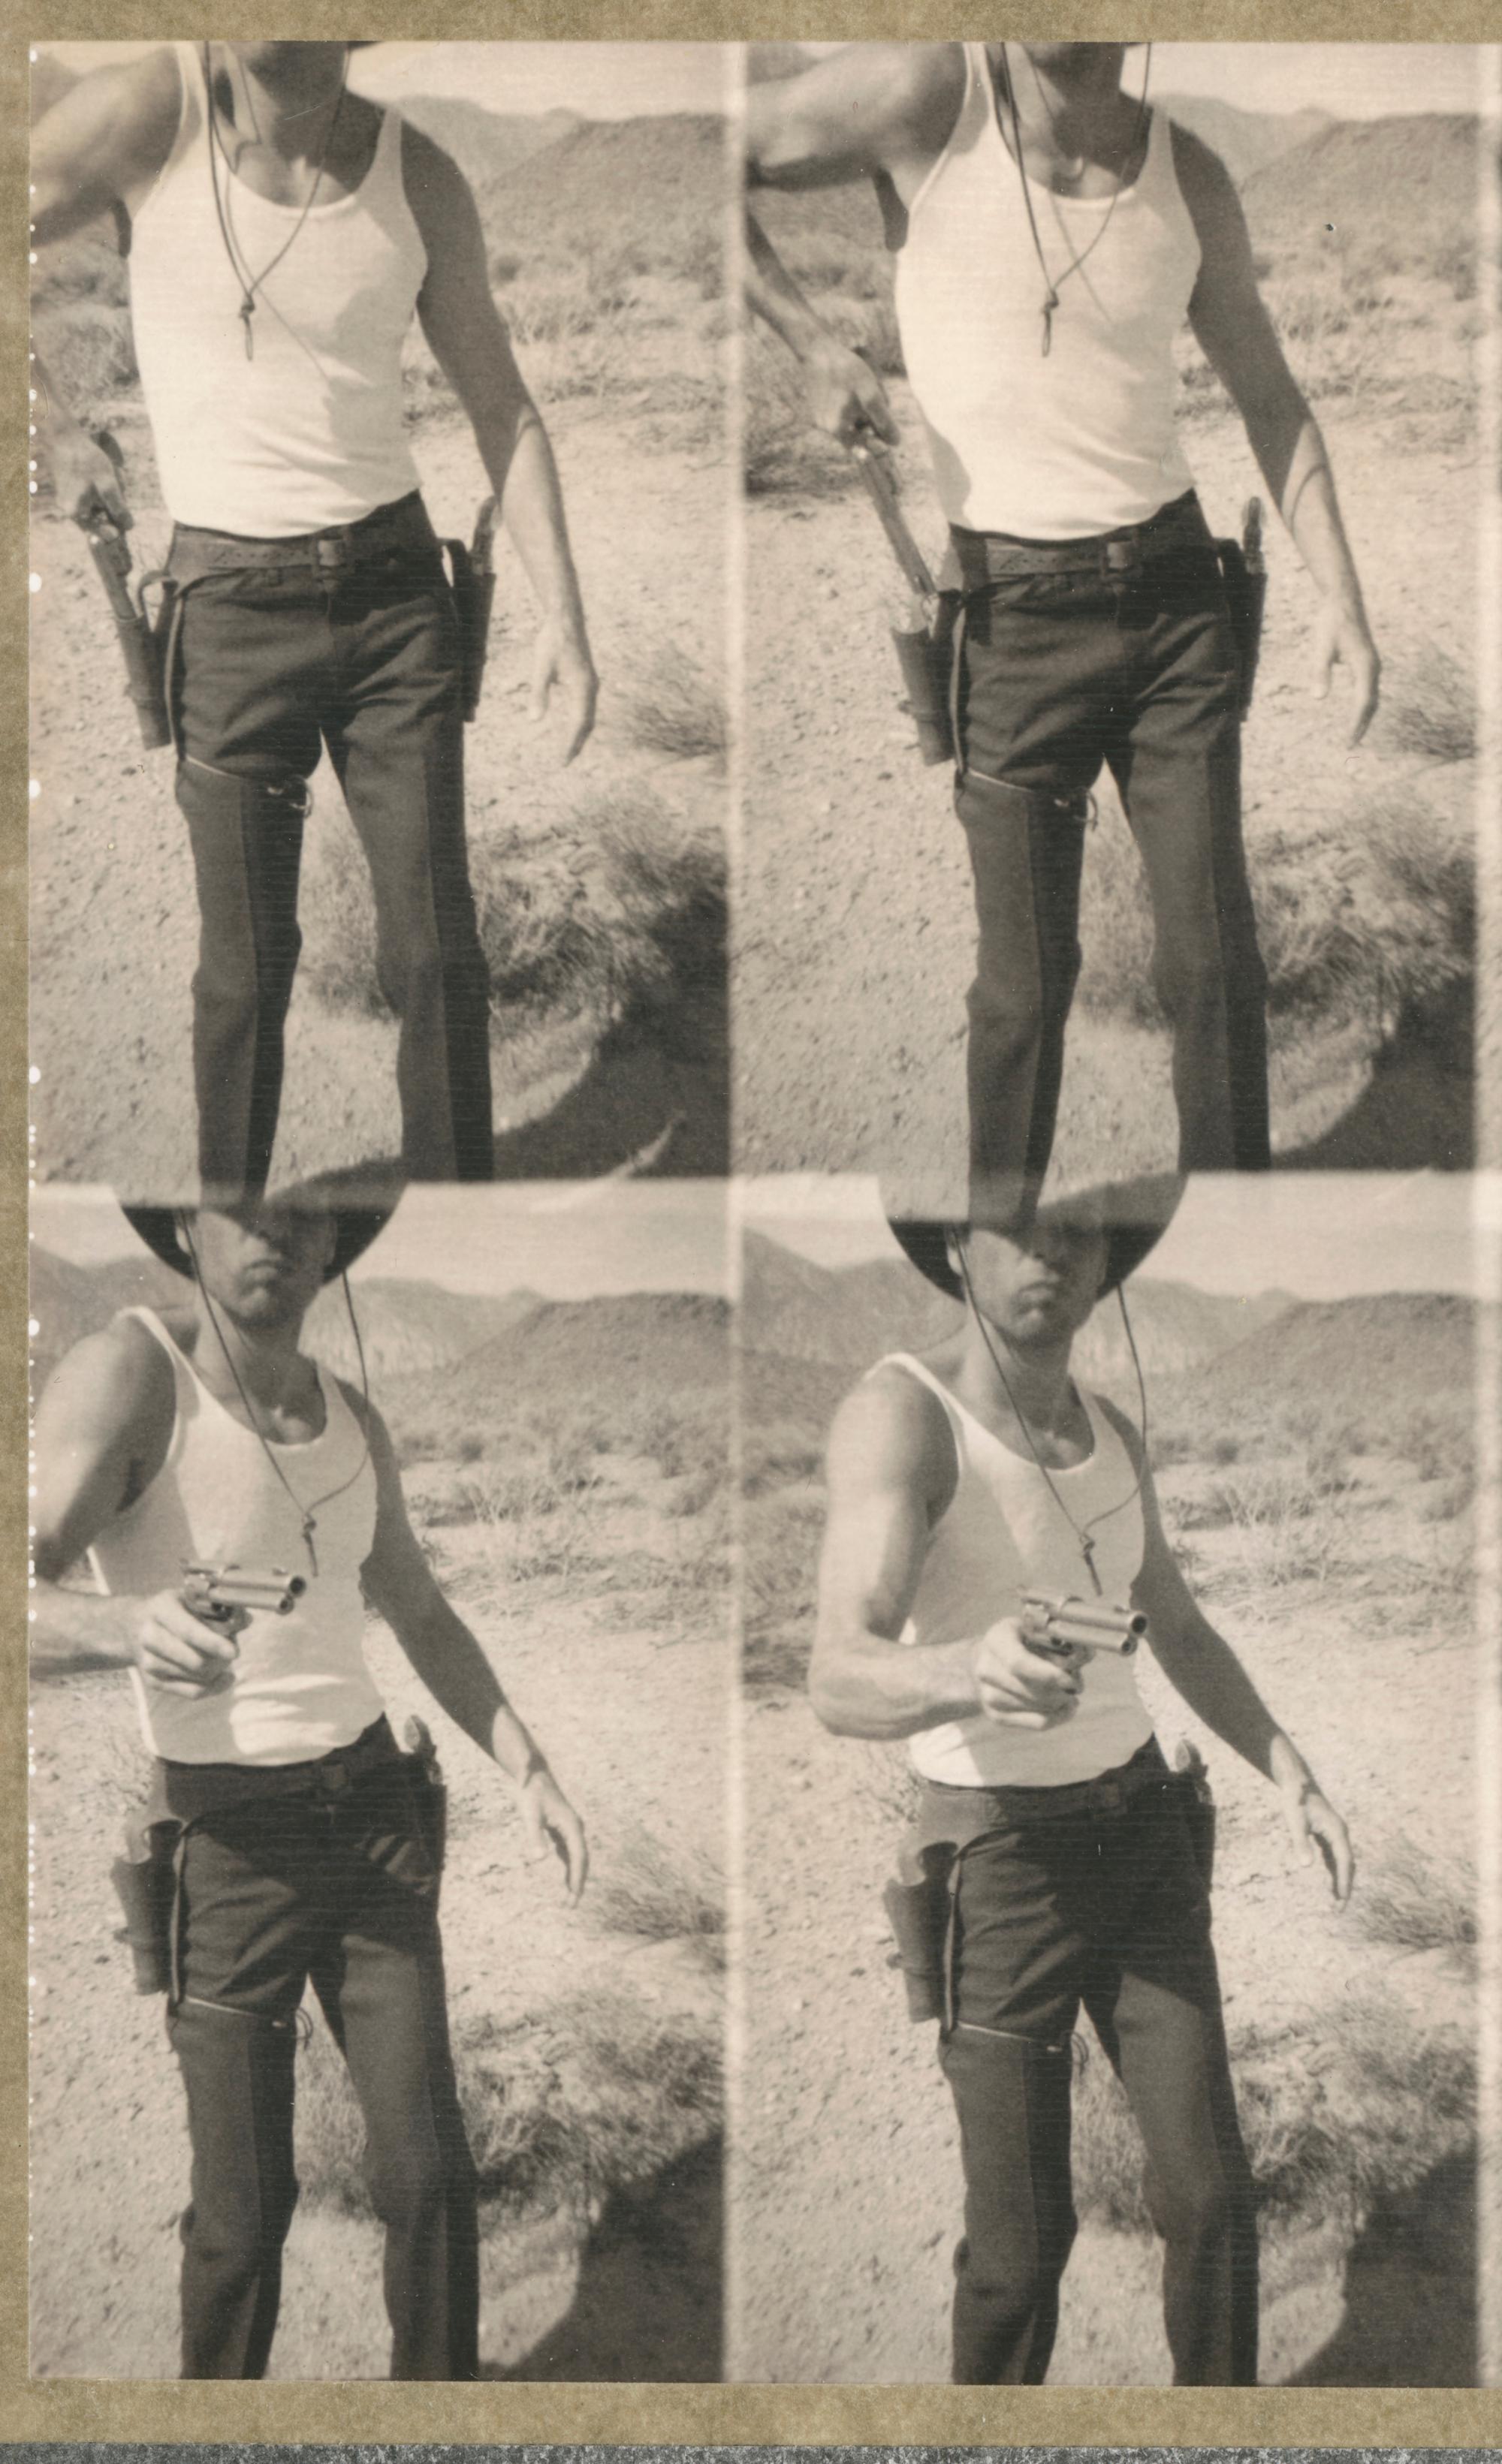 Stefanie Schneider Black and White Photograph - Untitled Sequence (Stranger than Paradise) - based on a Polaroid